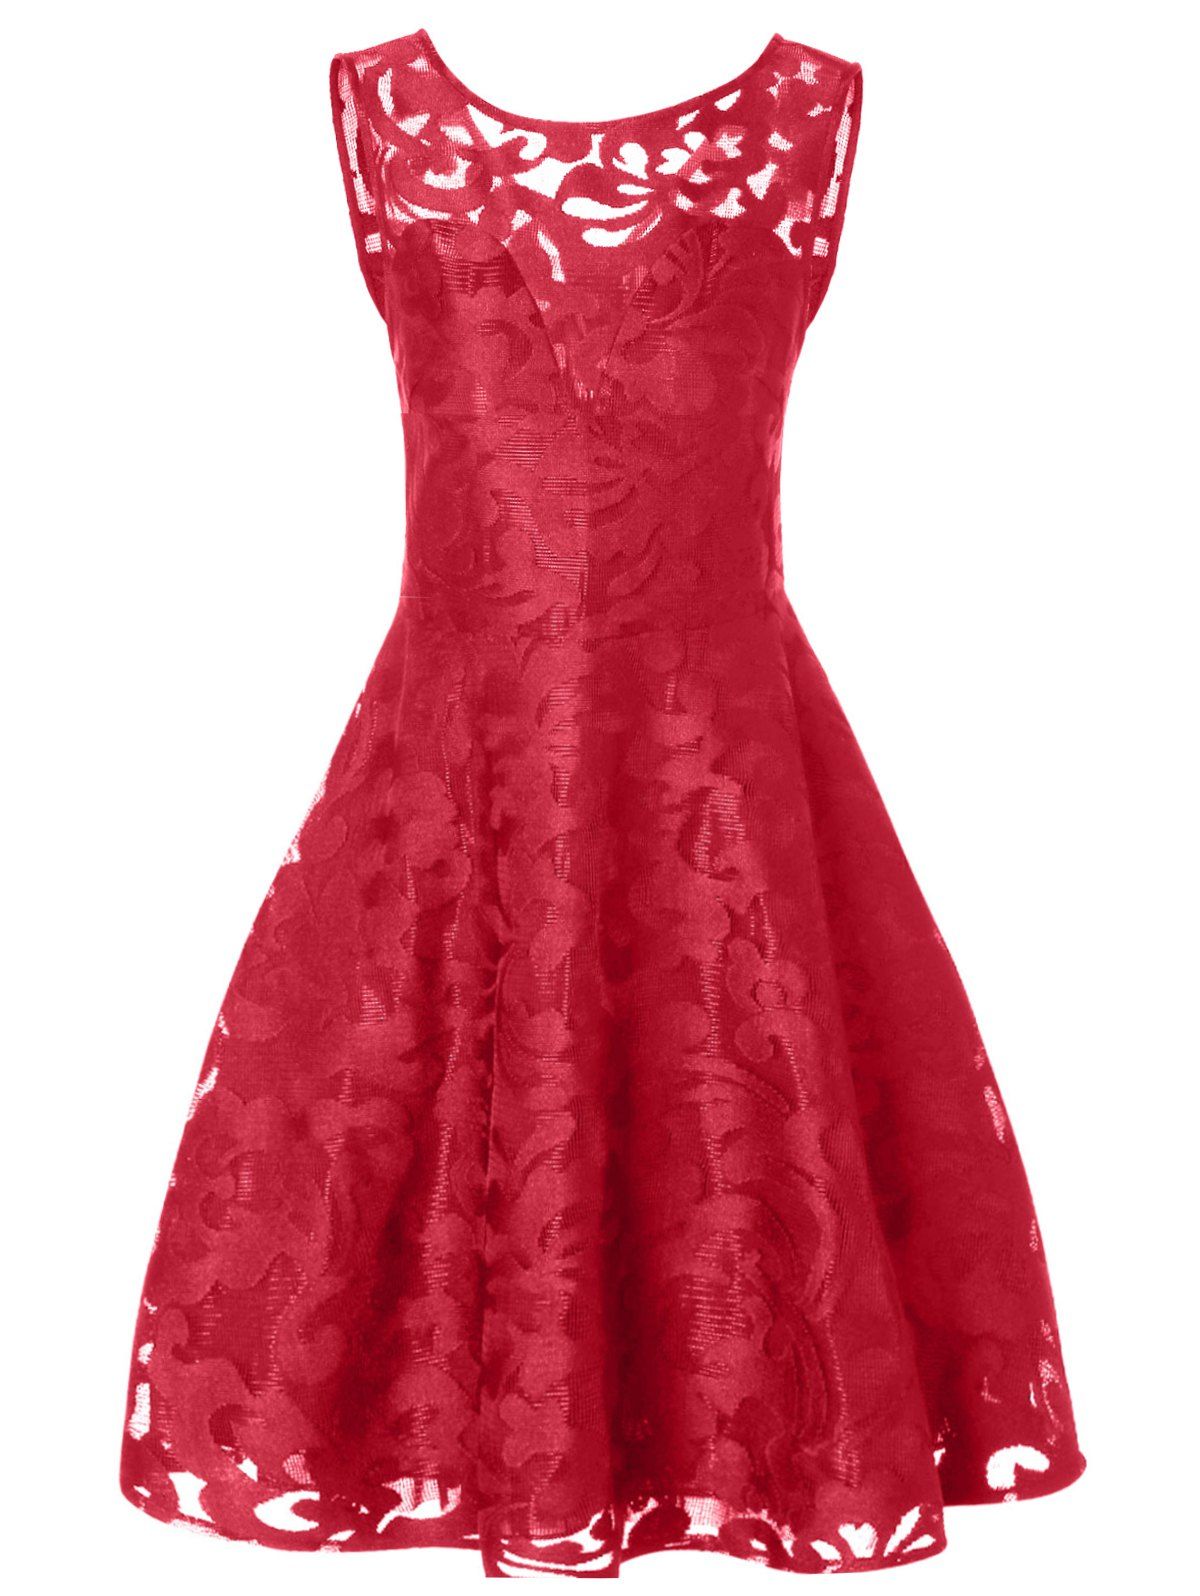 Lace Plus Size Holiday Short Cocktail Dress - BRIGHT RED L